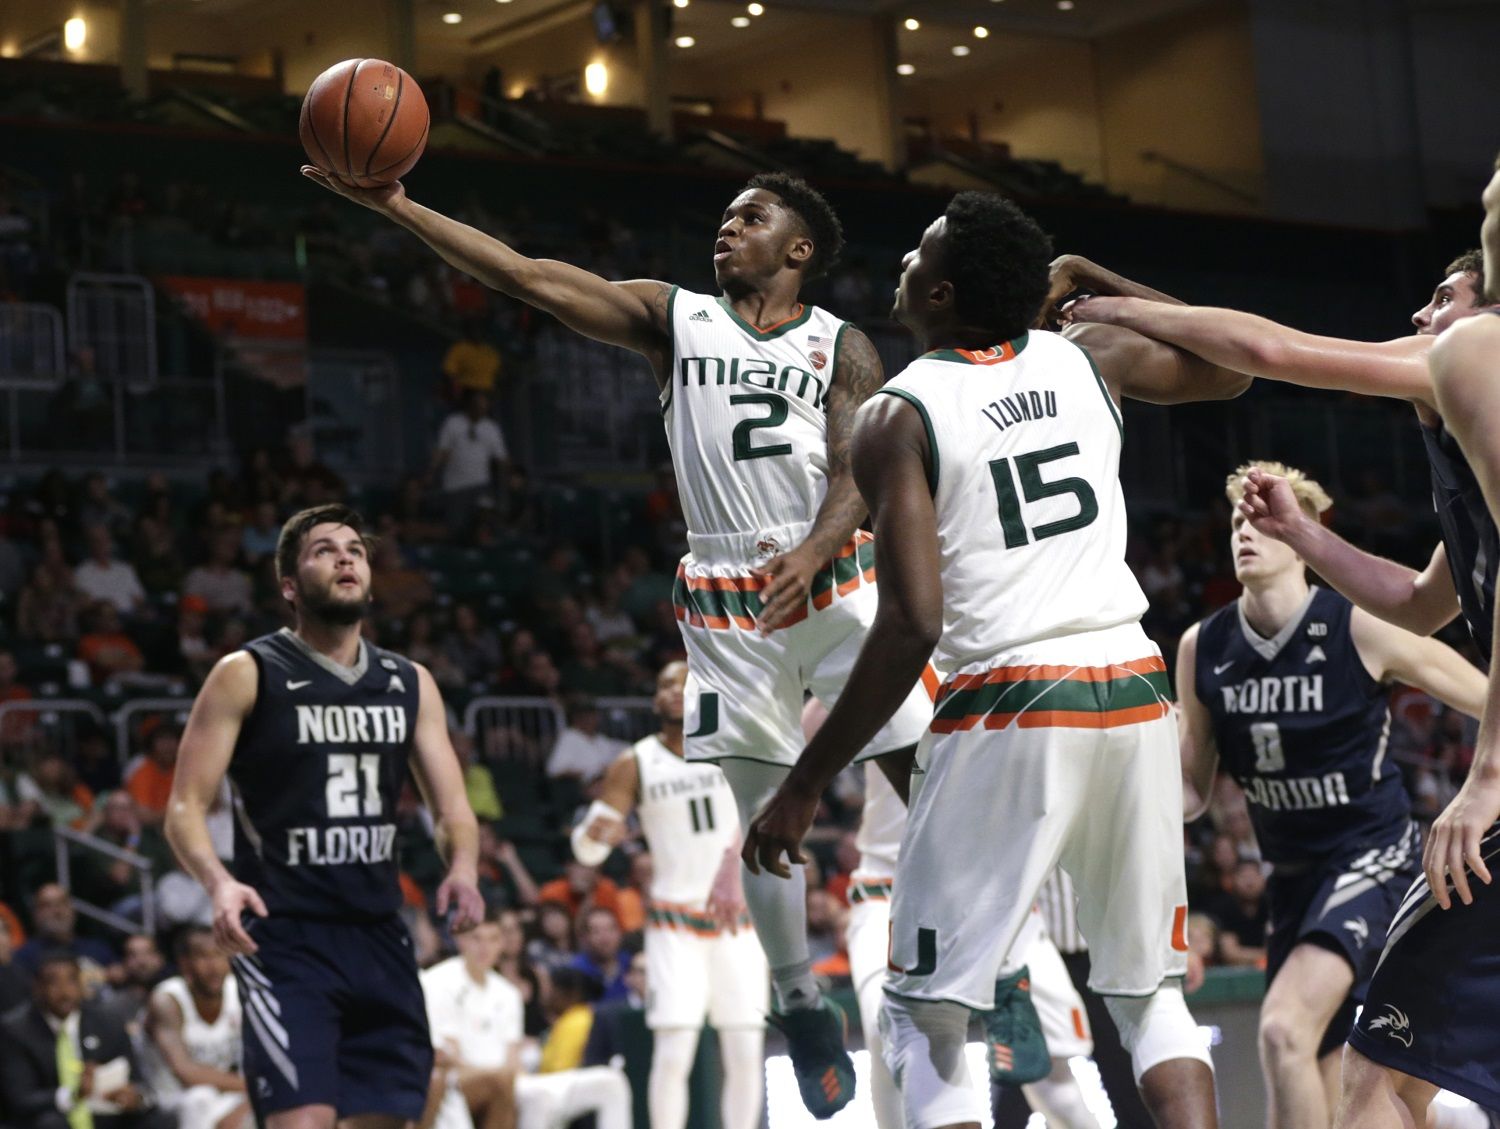 FILE - In this Nov. 25, 2017, file photo, Miami's Chris Lykes (2) goes to the basket during the second half of an NCAA college basketball game against North Florida, in Coral Gables, Fla. Lykes is 5-foot-7 and part of the most highly regarded recruiting class in coach Jim Larranaga’s seven seasons at Miami. (AP Photo/Lynne Sladky, File)